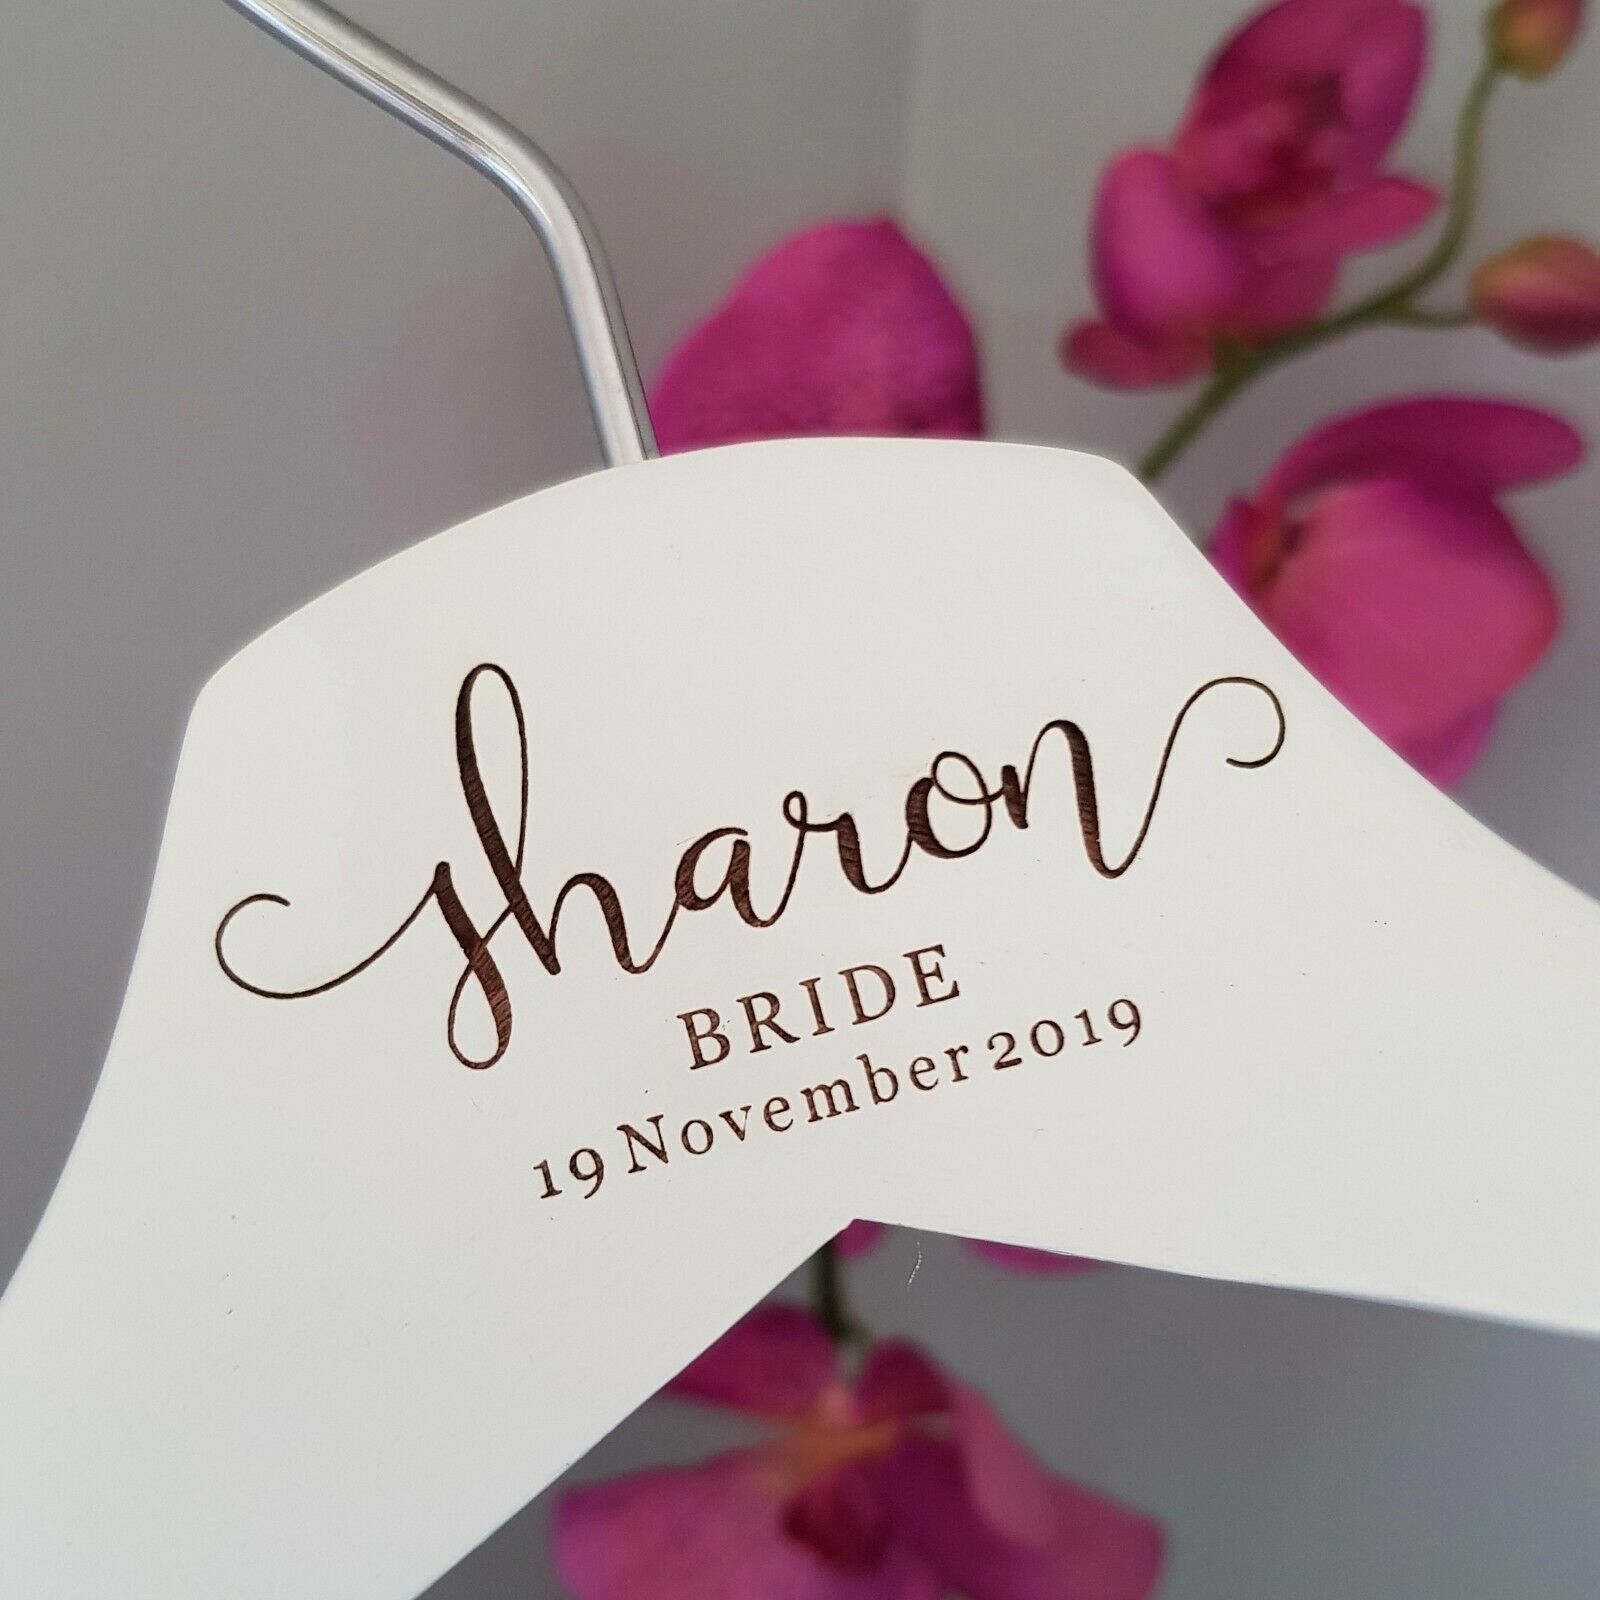 Details about   Personalised White Wooden Wedding Dress Coat Hangers For Bridal Bridesmaid Groom 